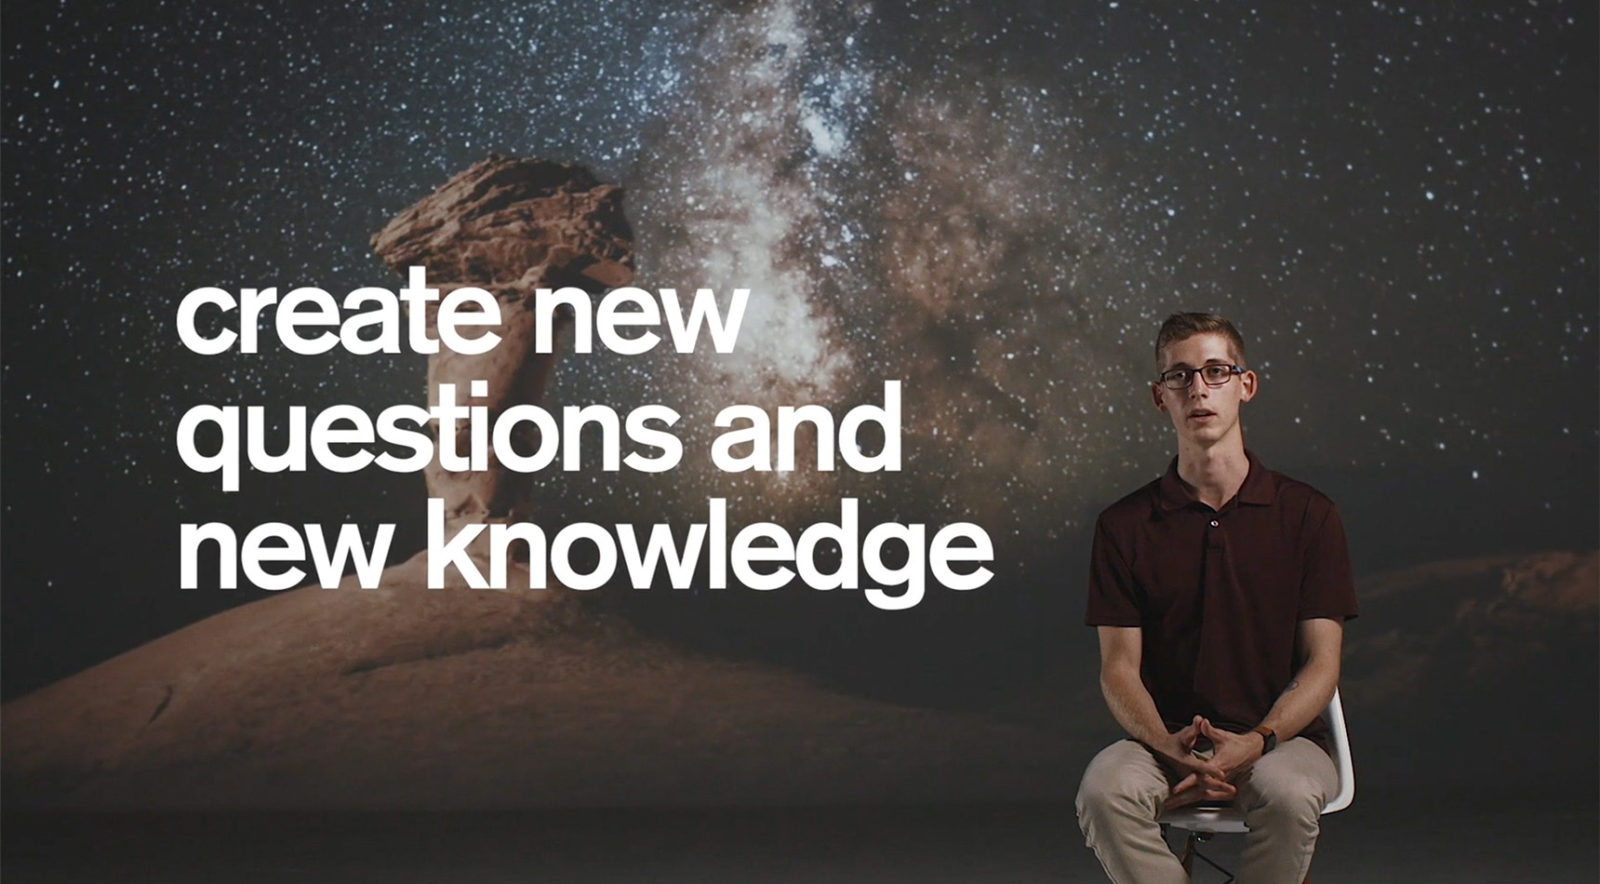 Create new questions and new knowledge